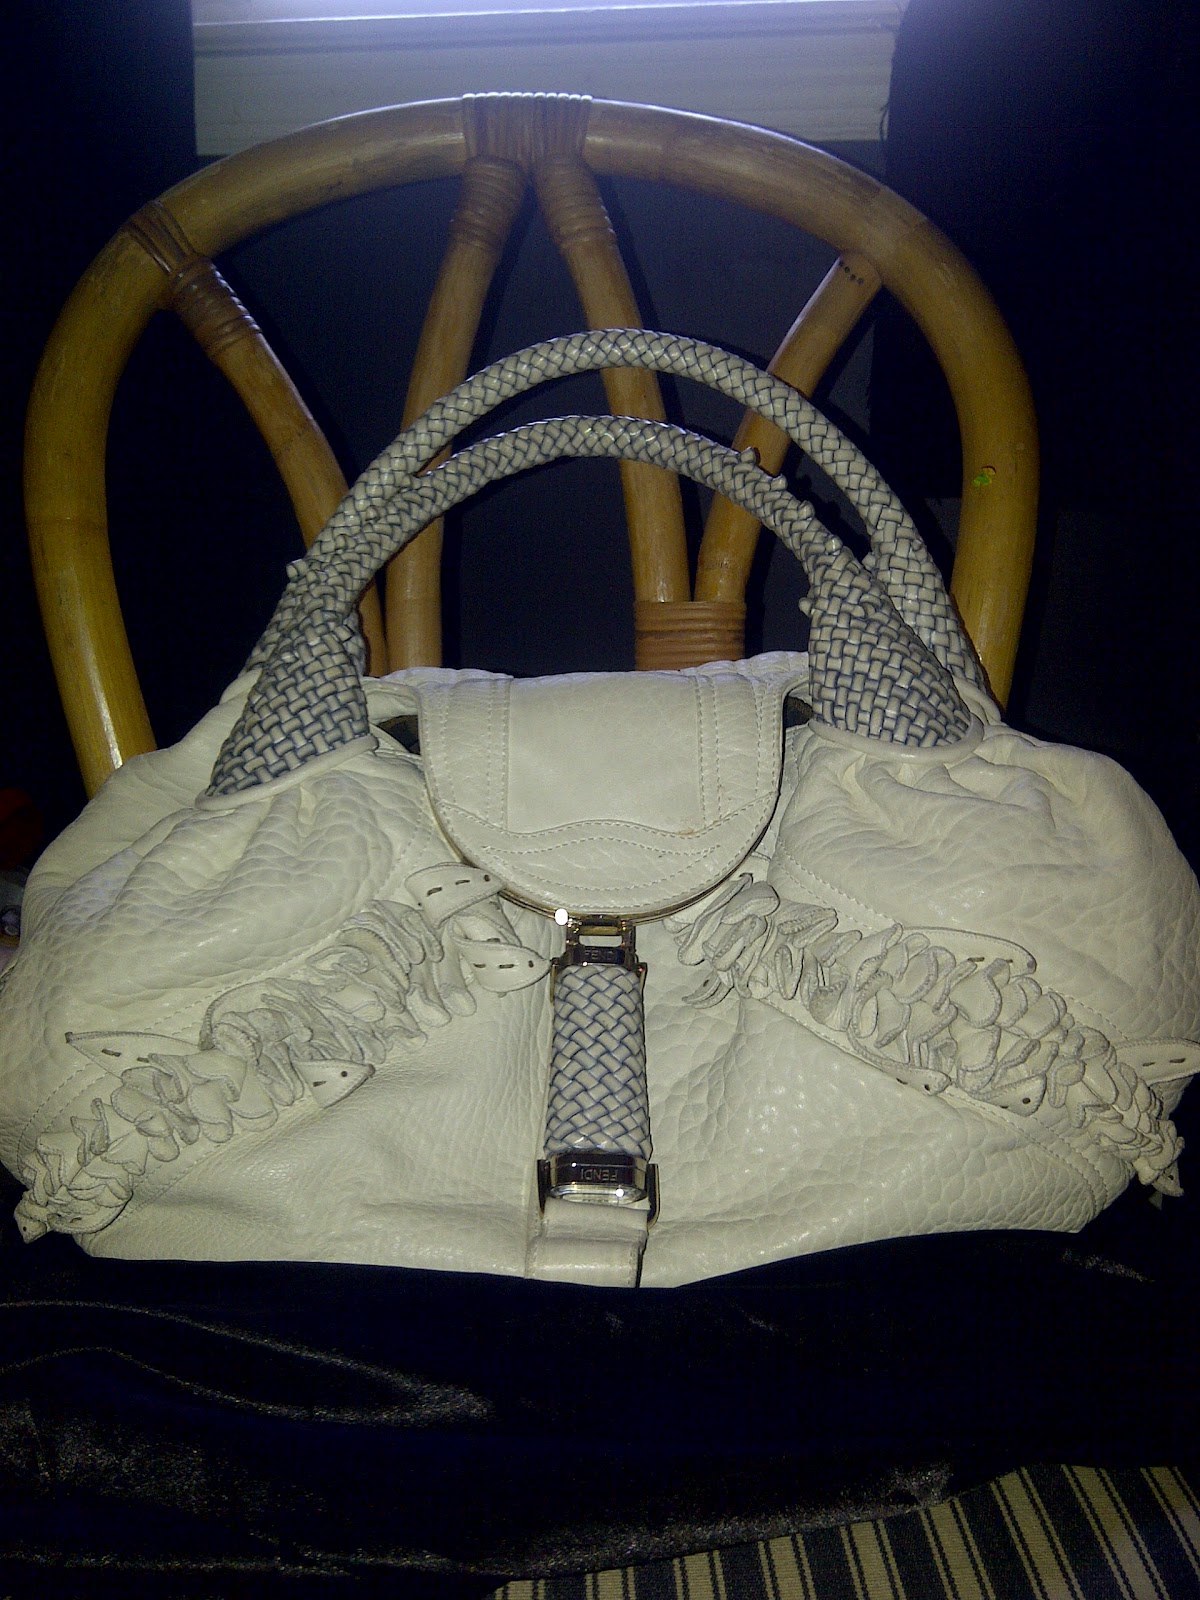 about handbags: October 2012